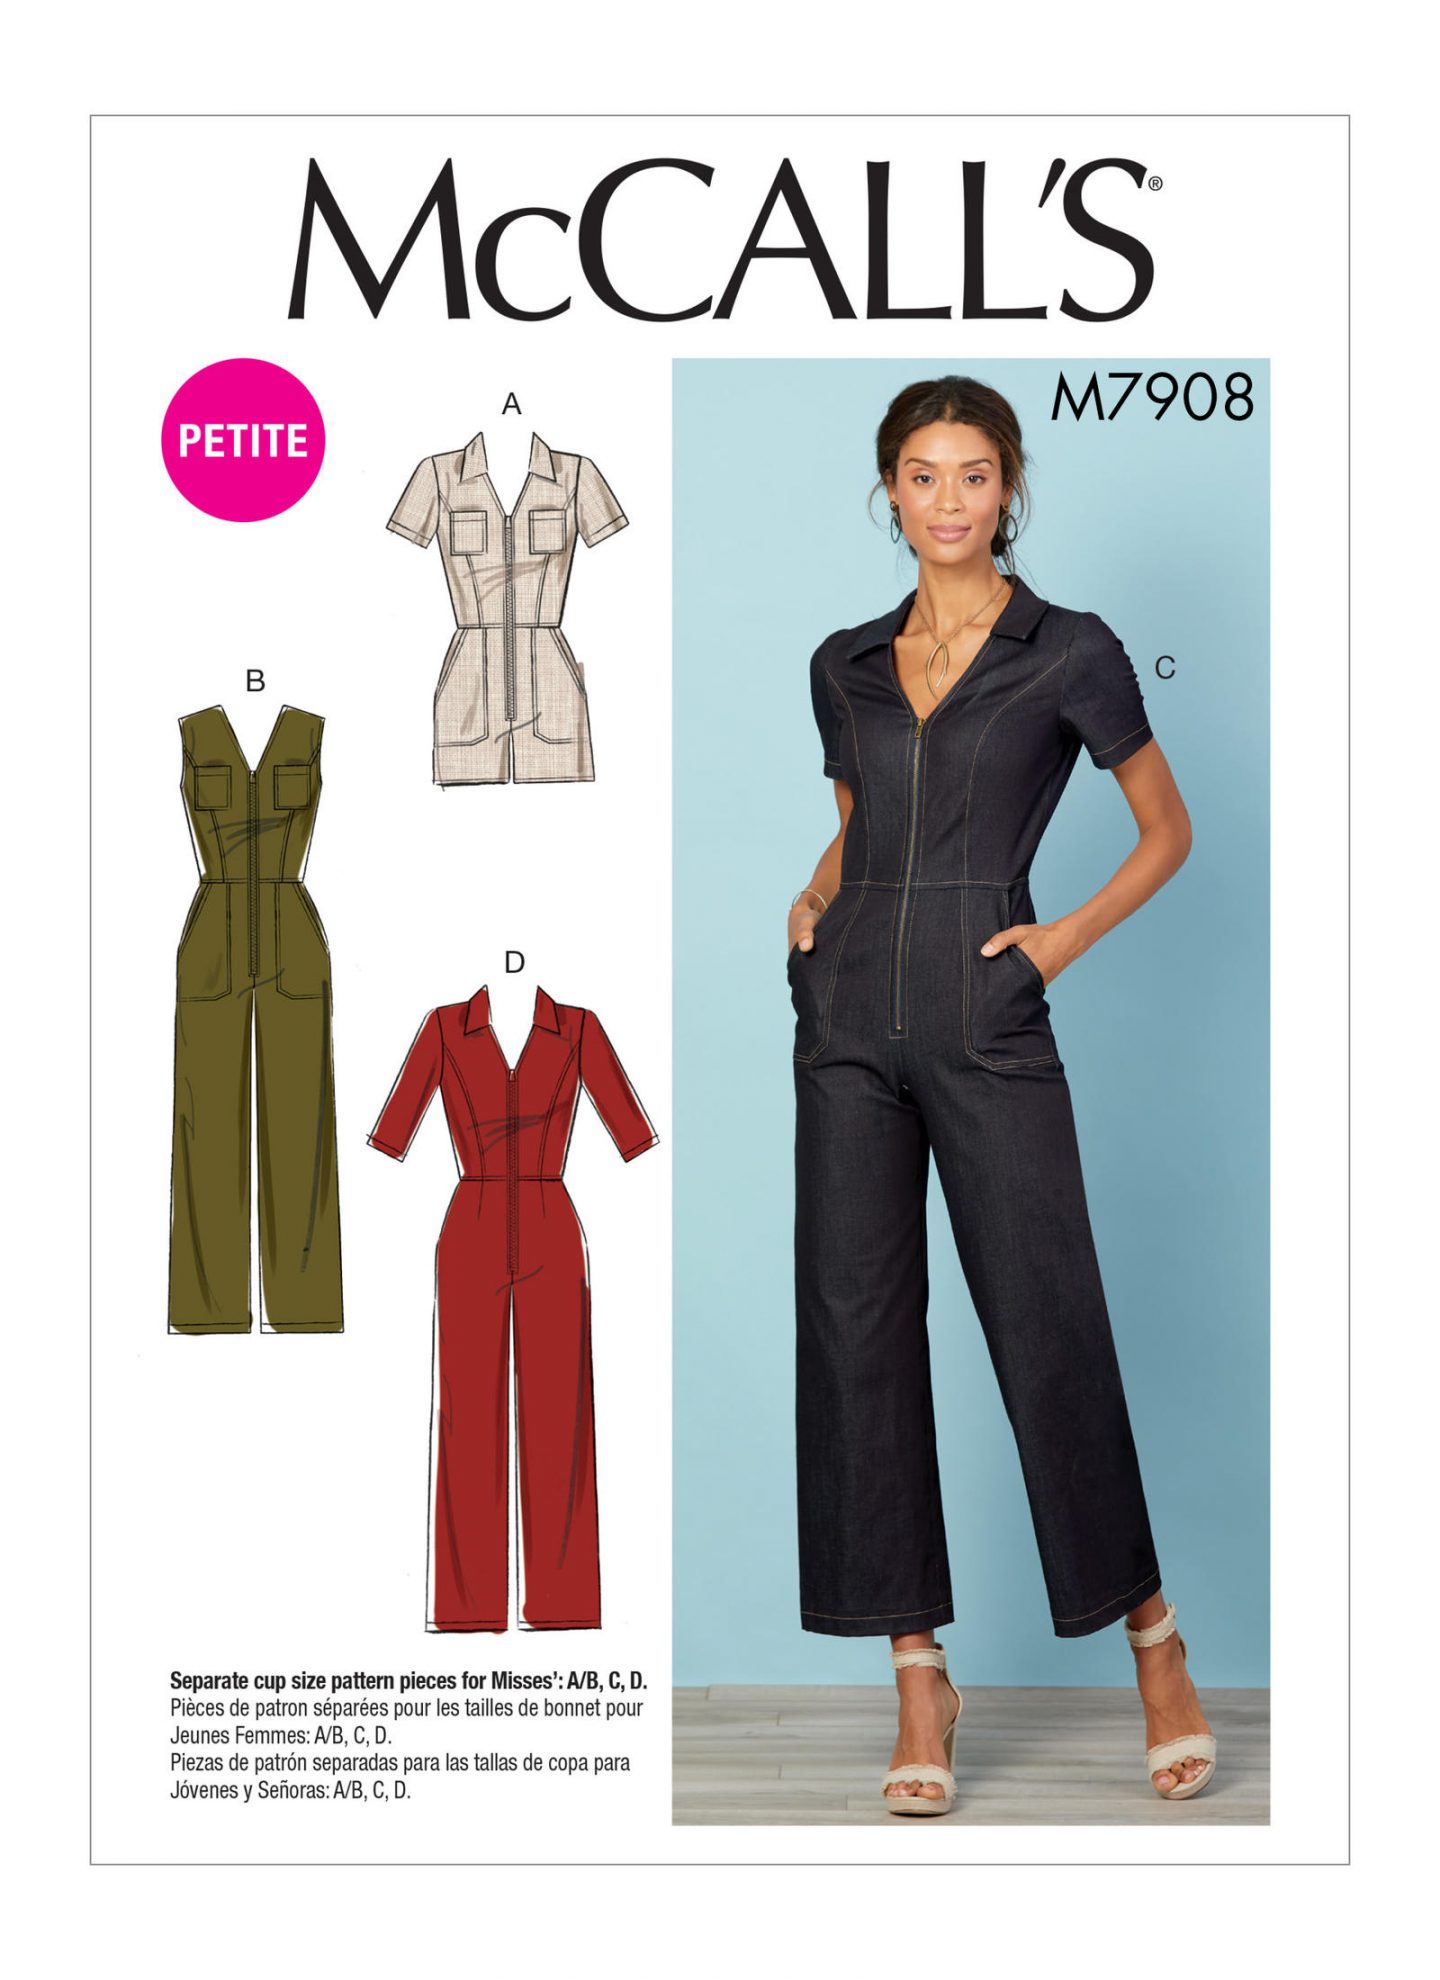 McCalls 7908 Spring trends 2019 to inspire your sewing